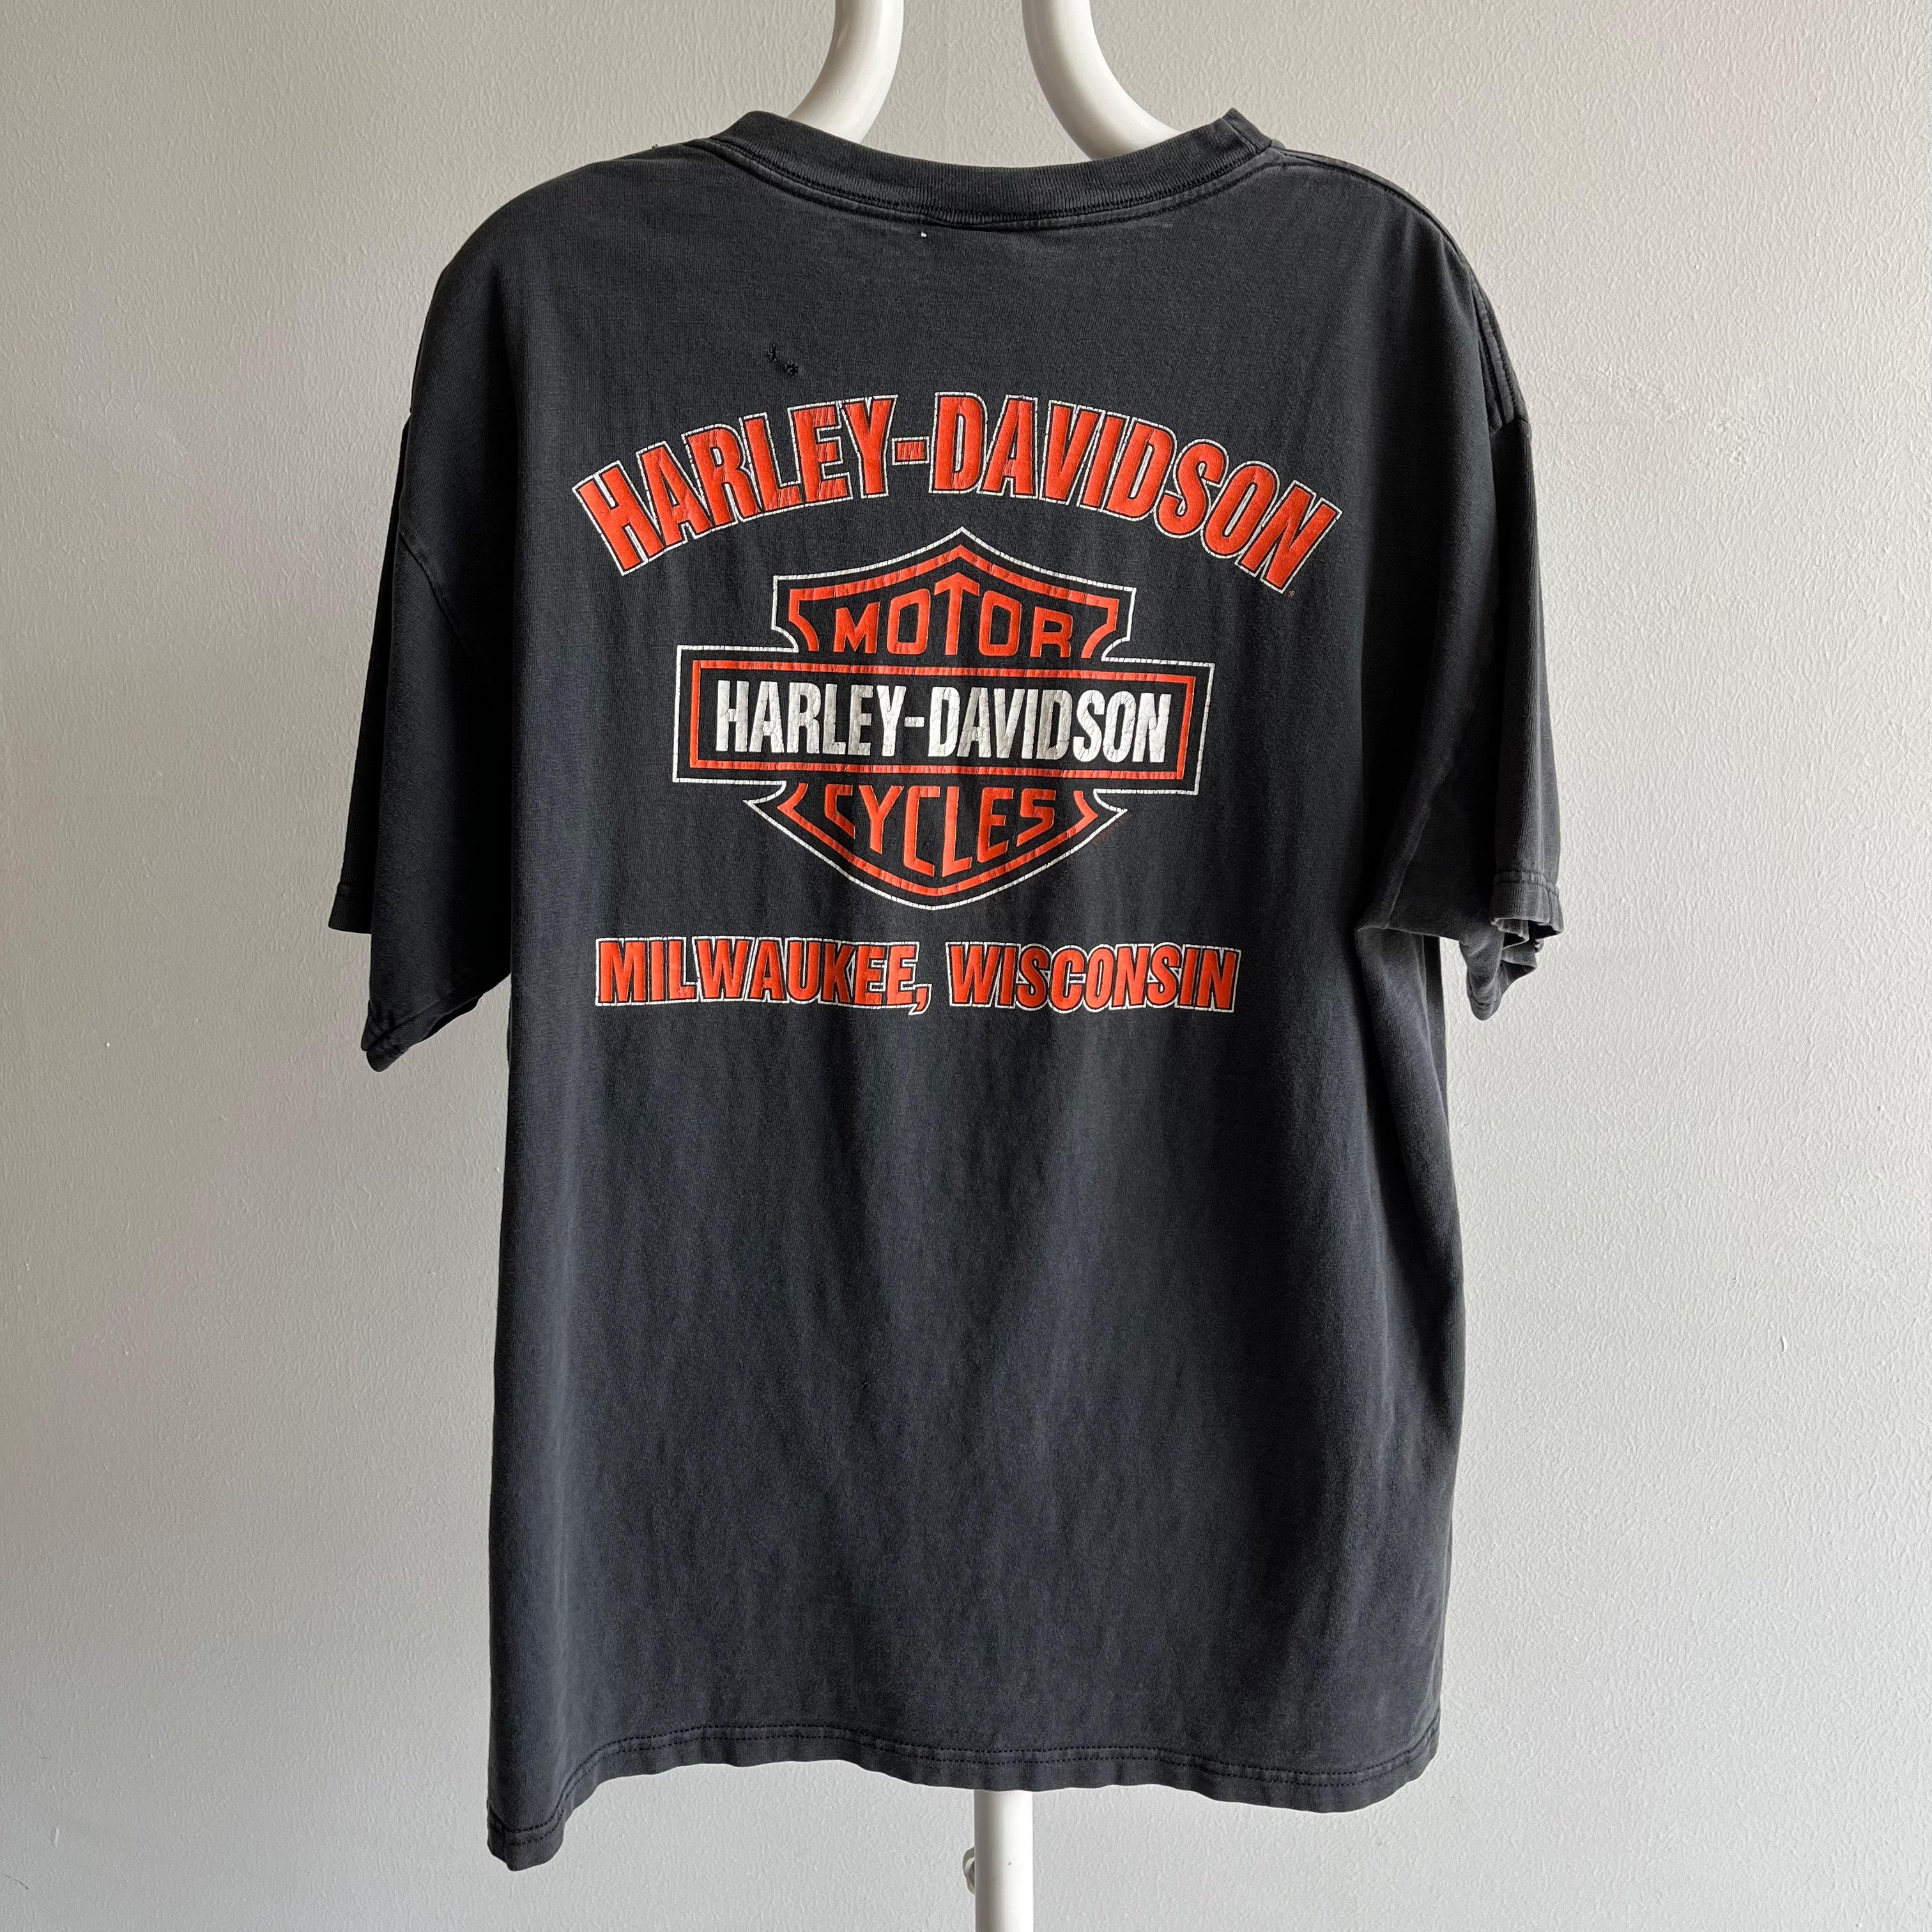 1990s Beat Up and Then Mended Harley T-Shirt - Truly One-Of-A-Kind